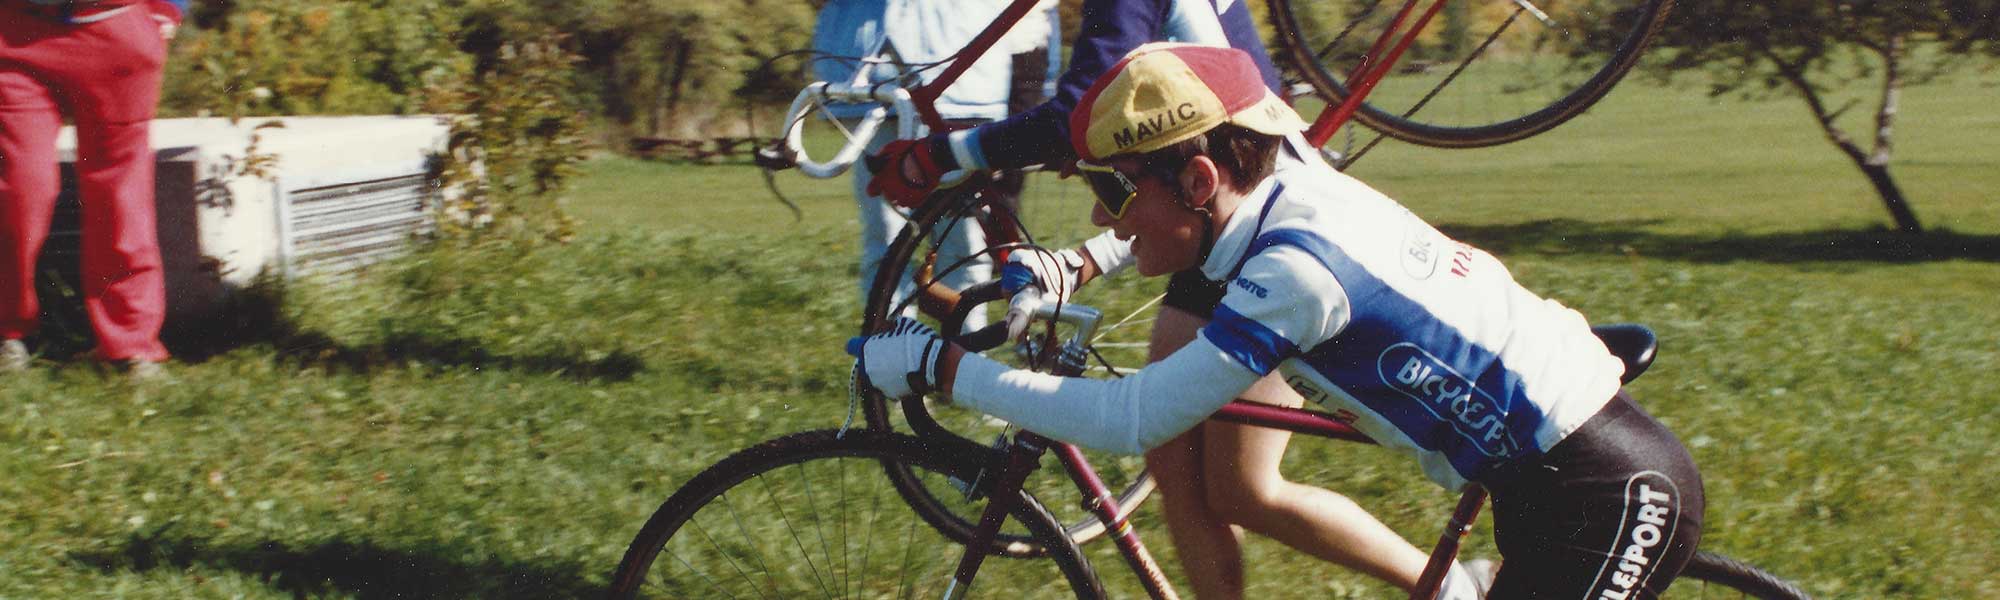 Photo: Racing cyclocross was once a common method for professional cyclists to stay fit in the off-season. 